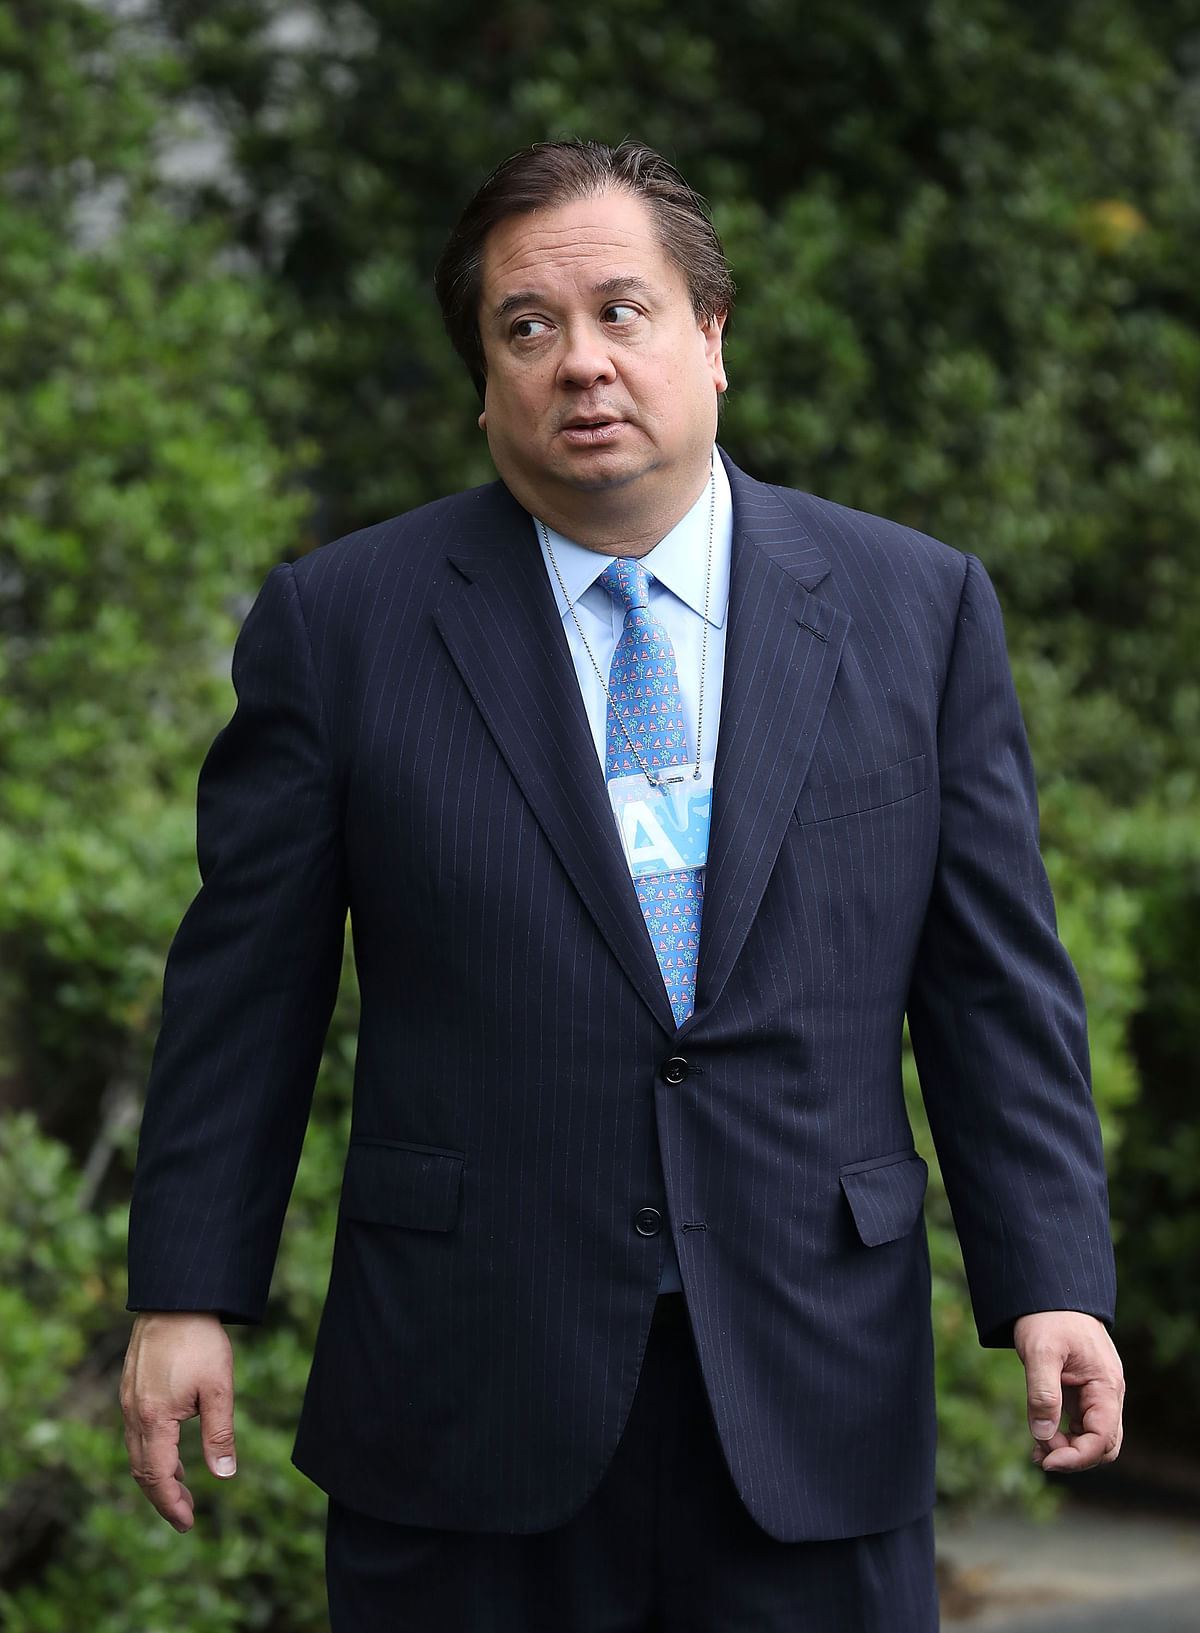 This 17 April 2017 file photo shows George T. Conway III, husband of White House Counselor to the President Kellyanne Conway, attending the 139th Easter Egg Roll on the South Lawn of the White House in Washington, DC. Photo: AFP